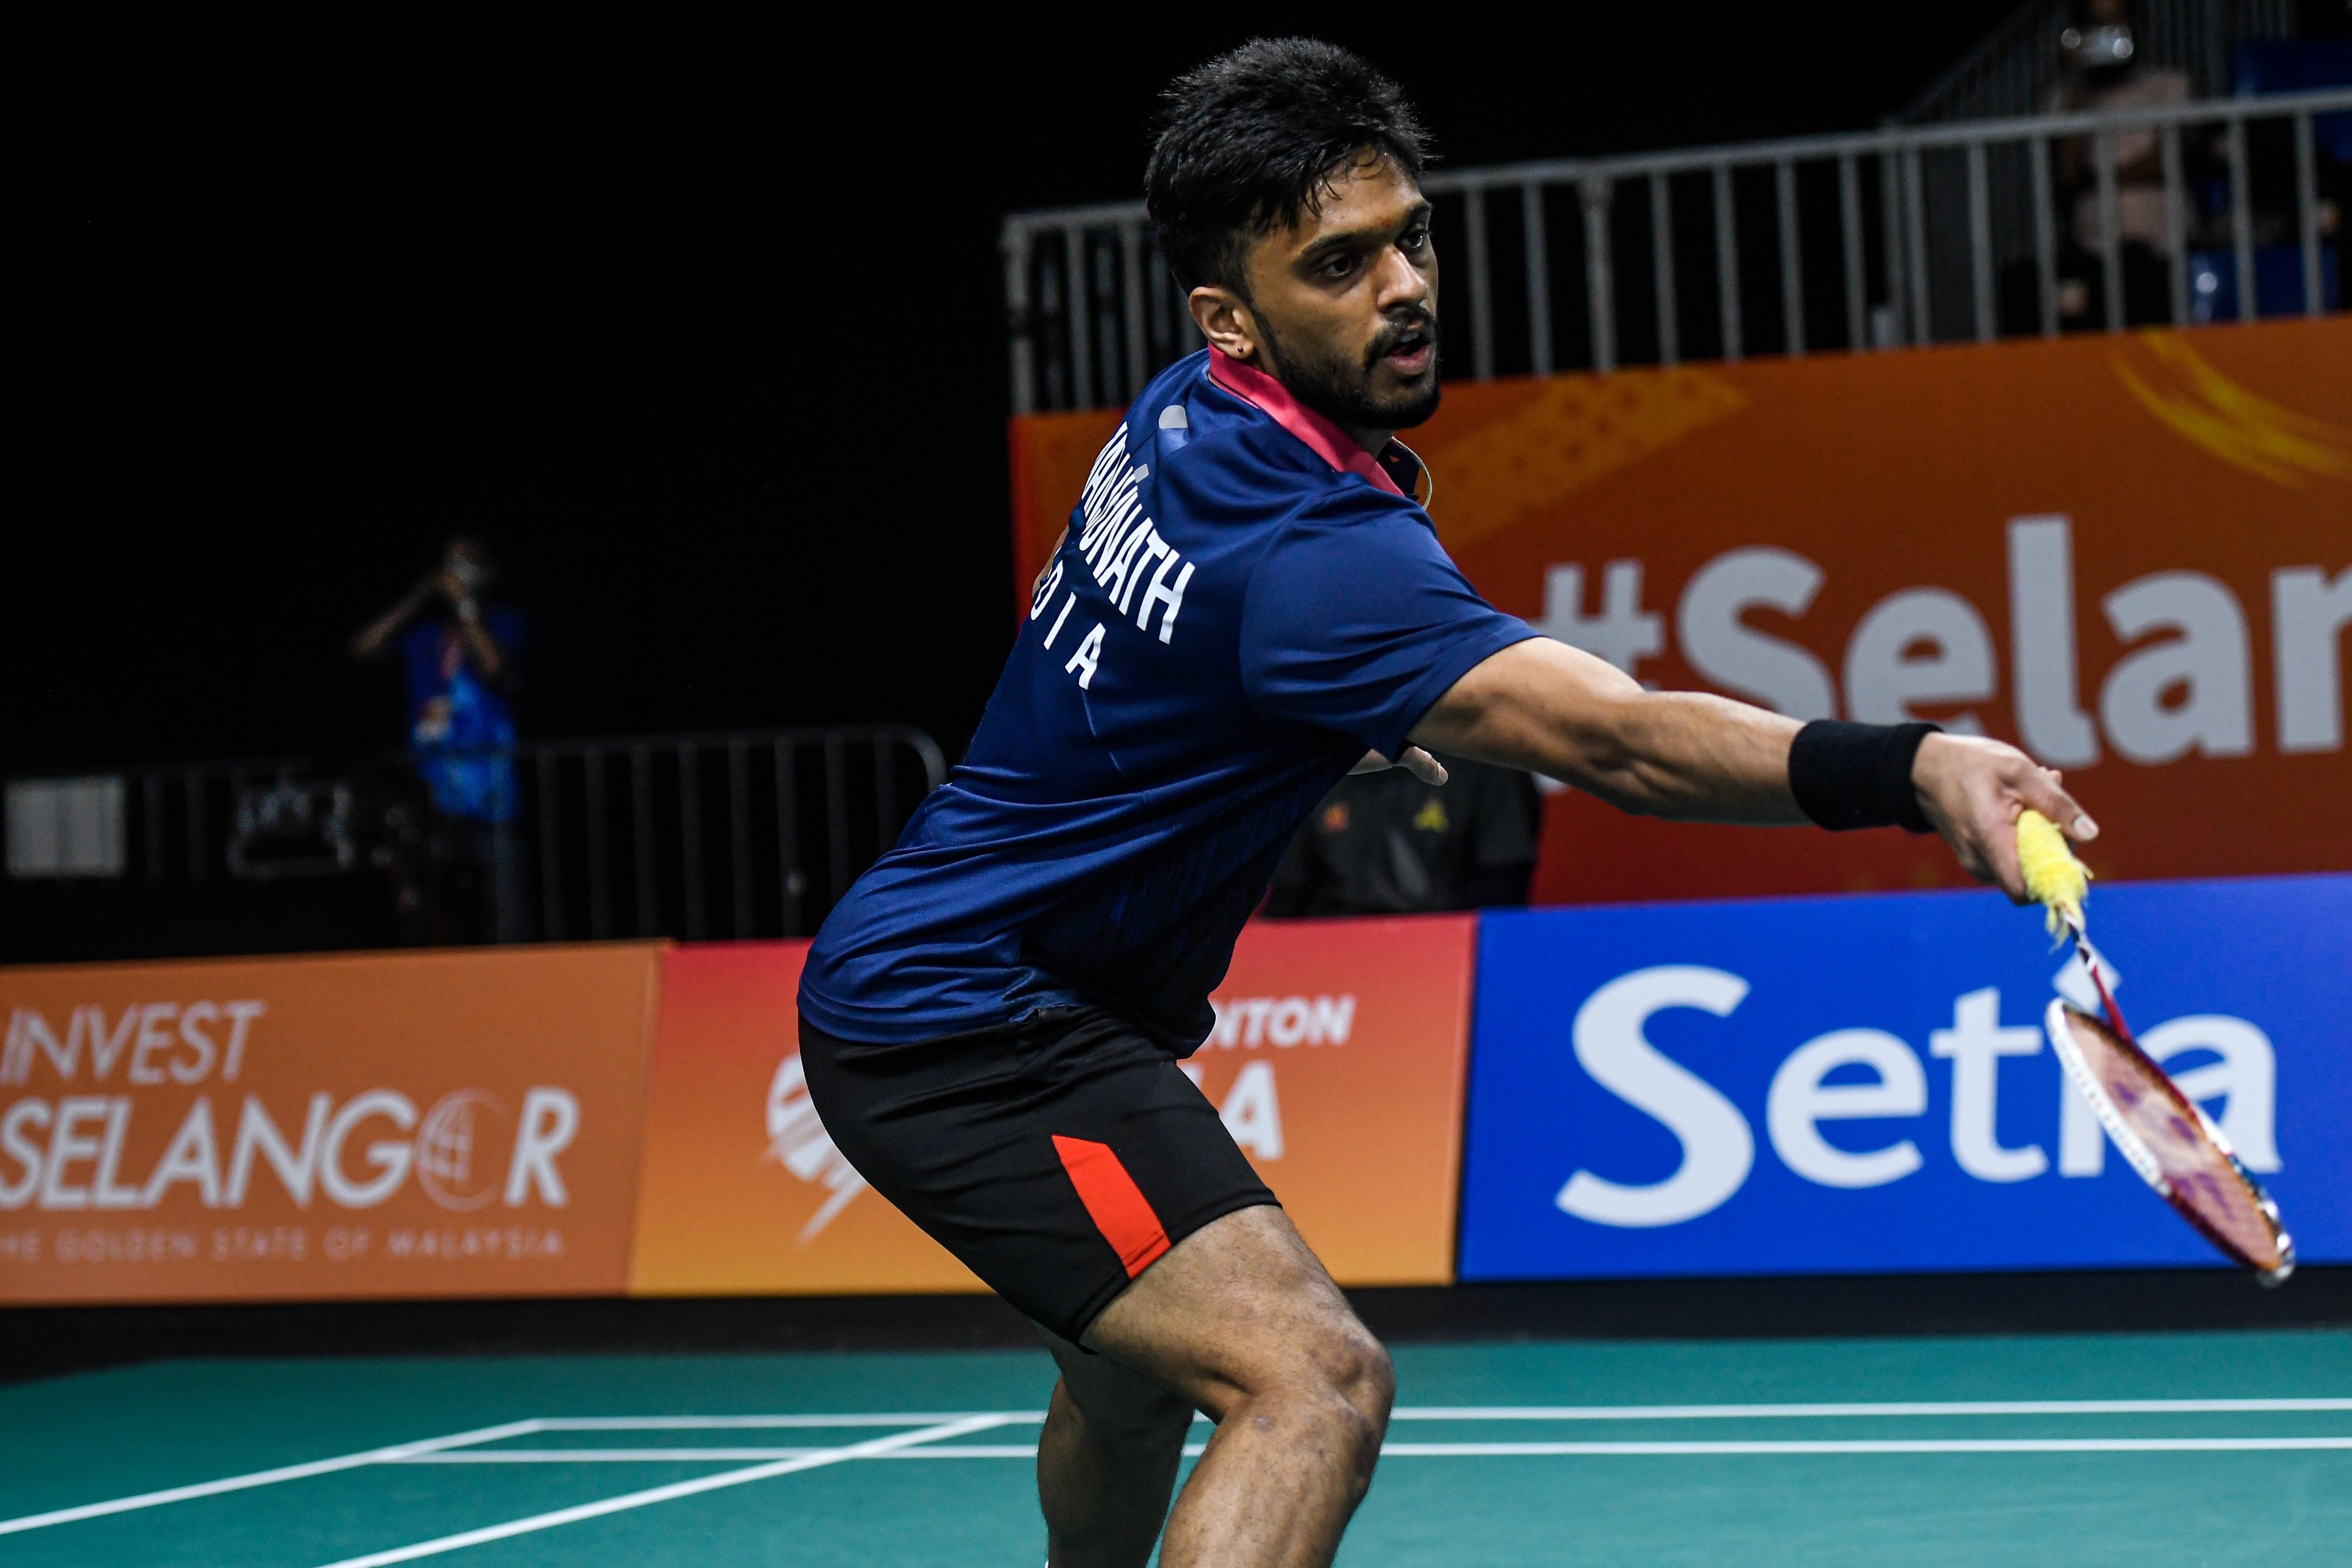 Bwf india open 2022 results